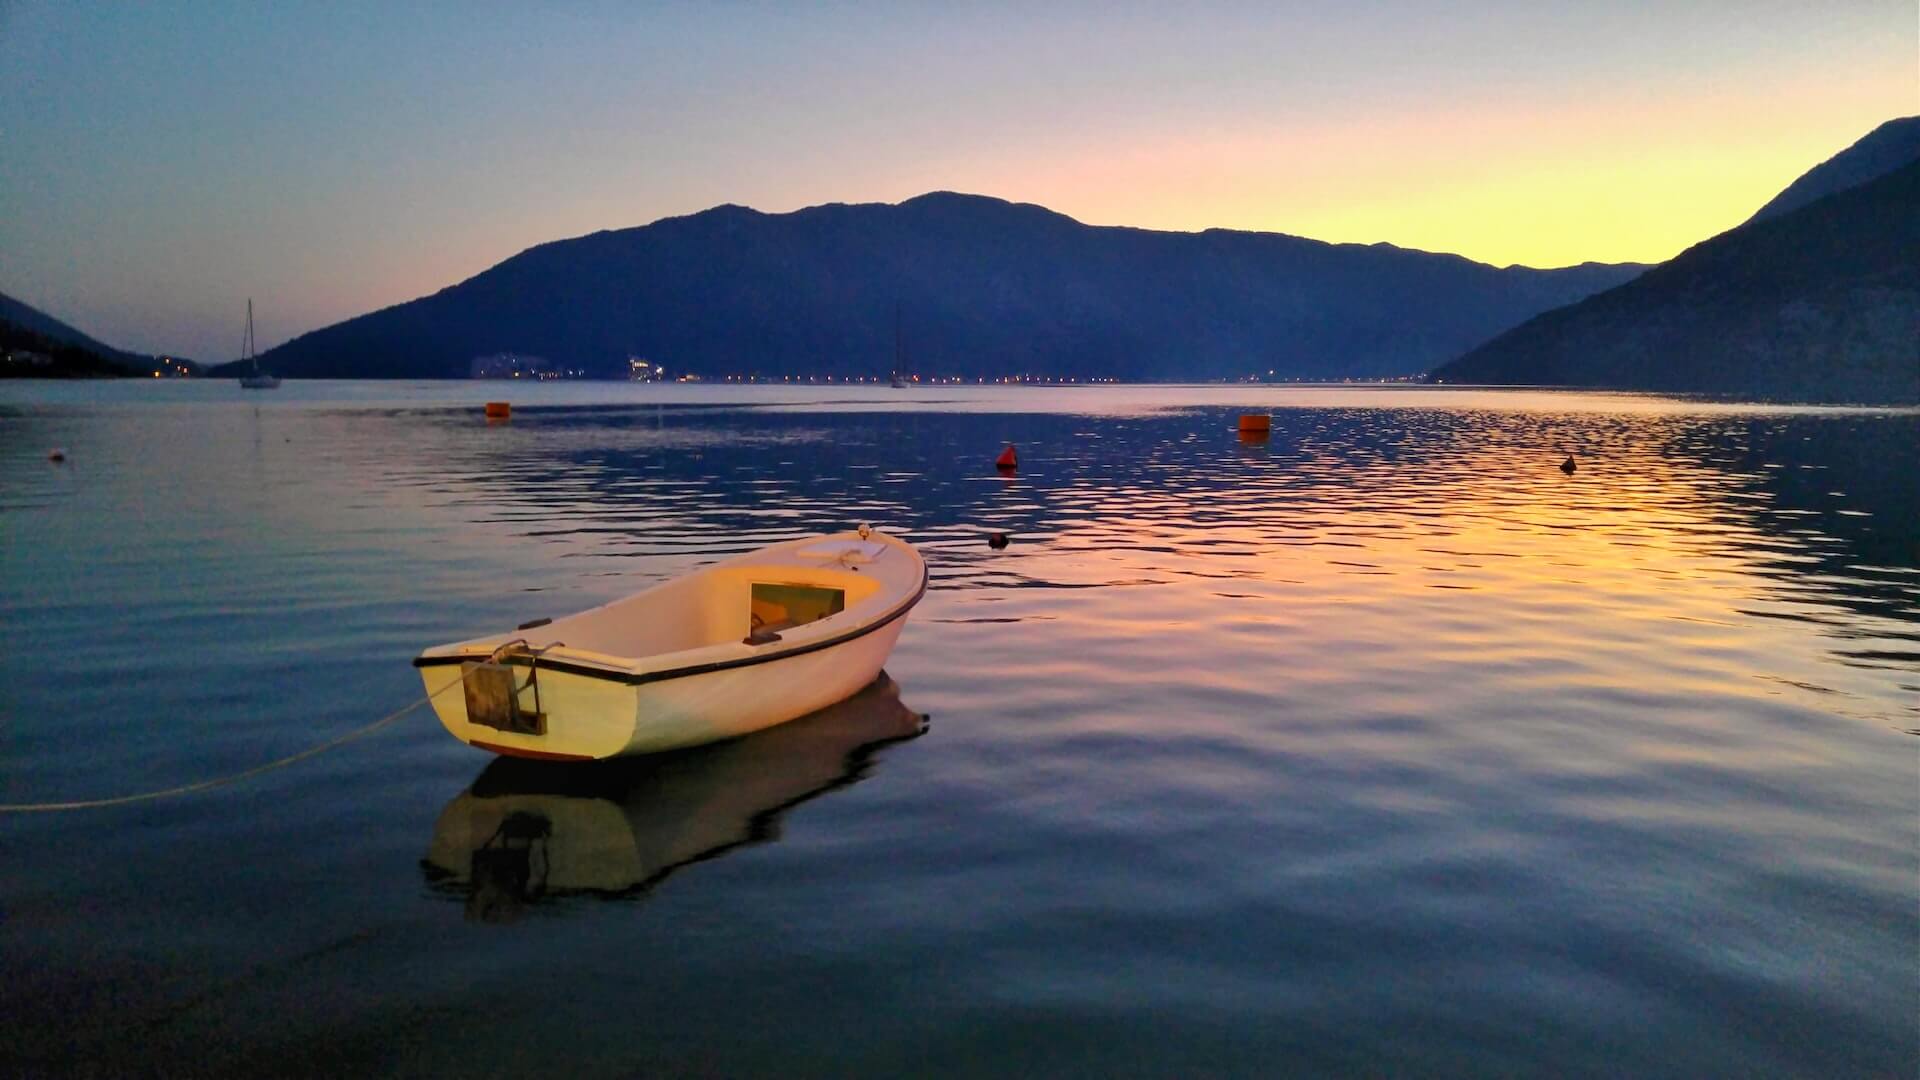 Image of a small fishing boat on Boka Bay in Montenegro at sunset